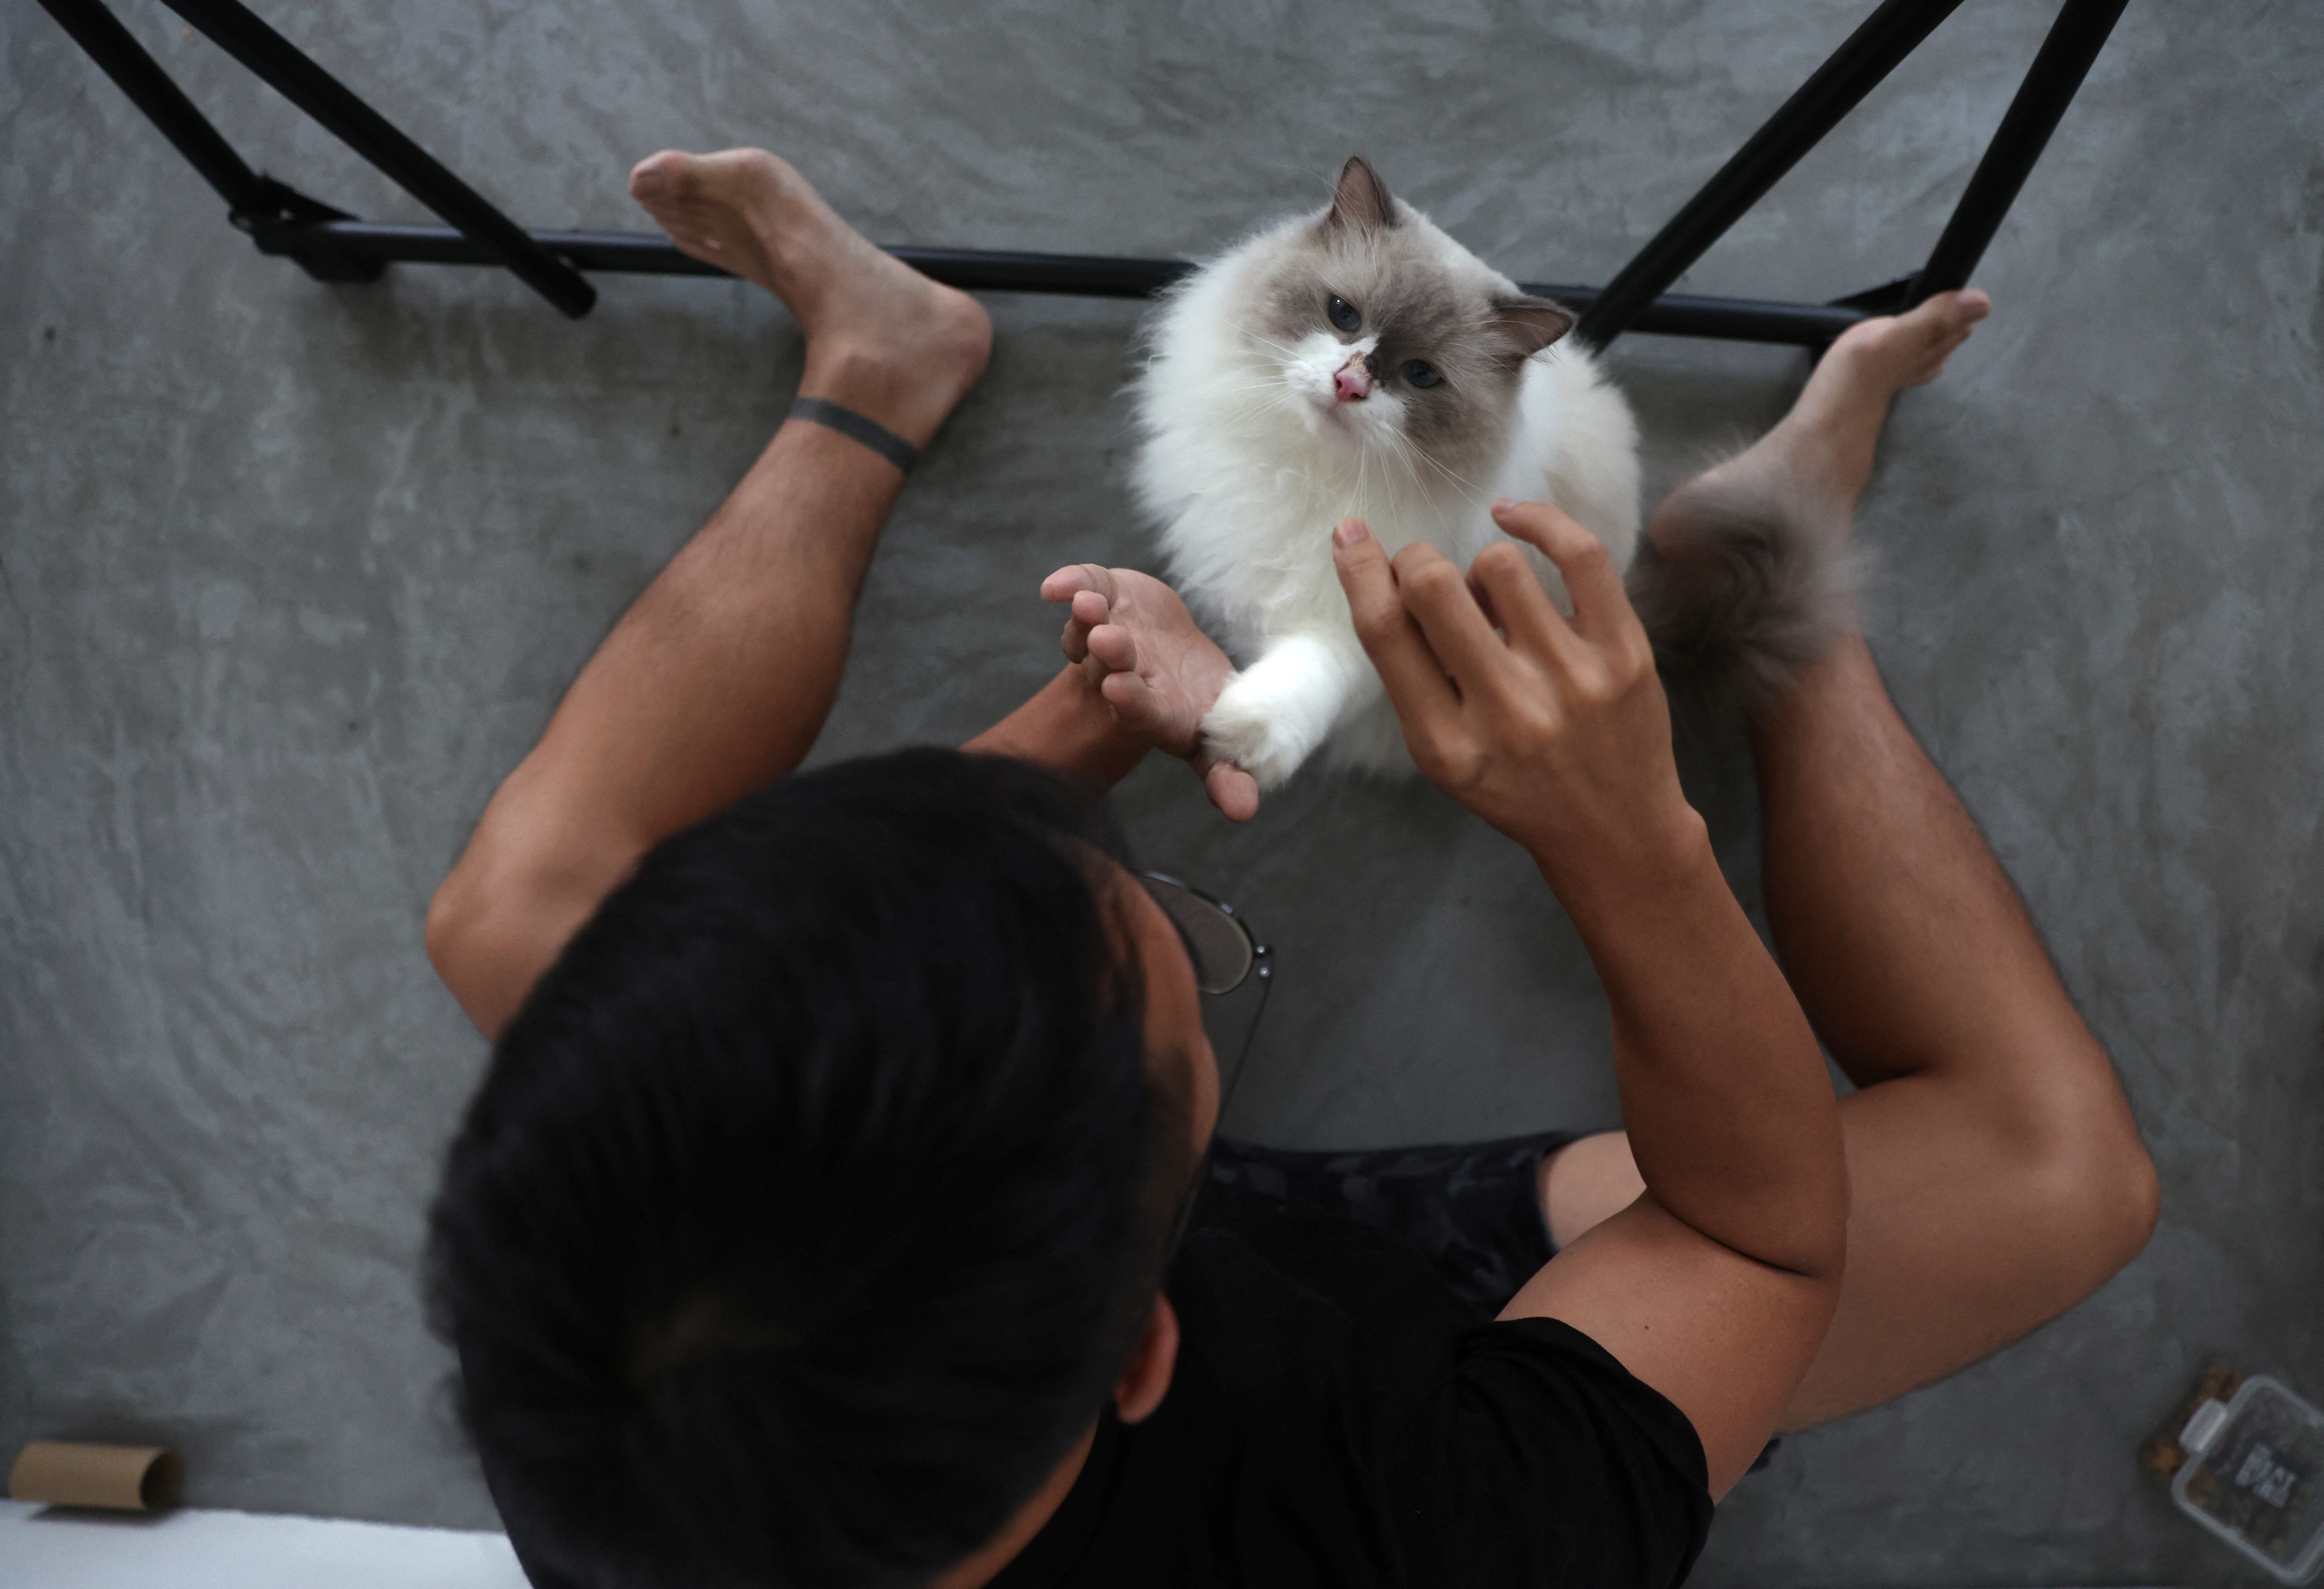 Owner Justin Sim, 29, plays with his Ragdoll cat, Mooncake, in his Housing and Development Board (HDB) flat in Singapore